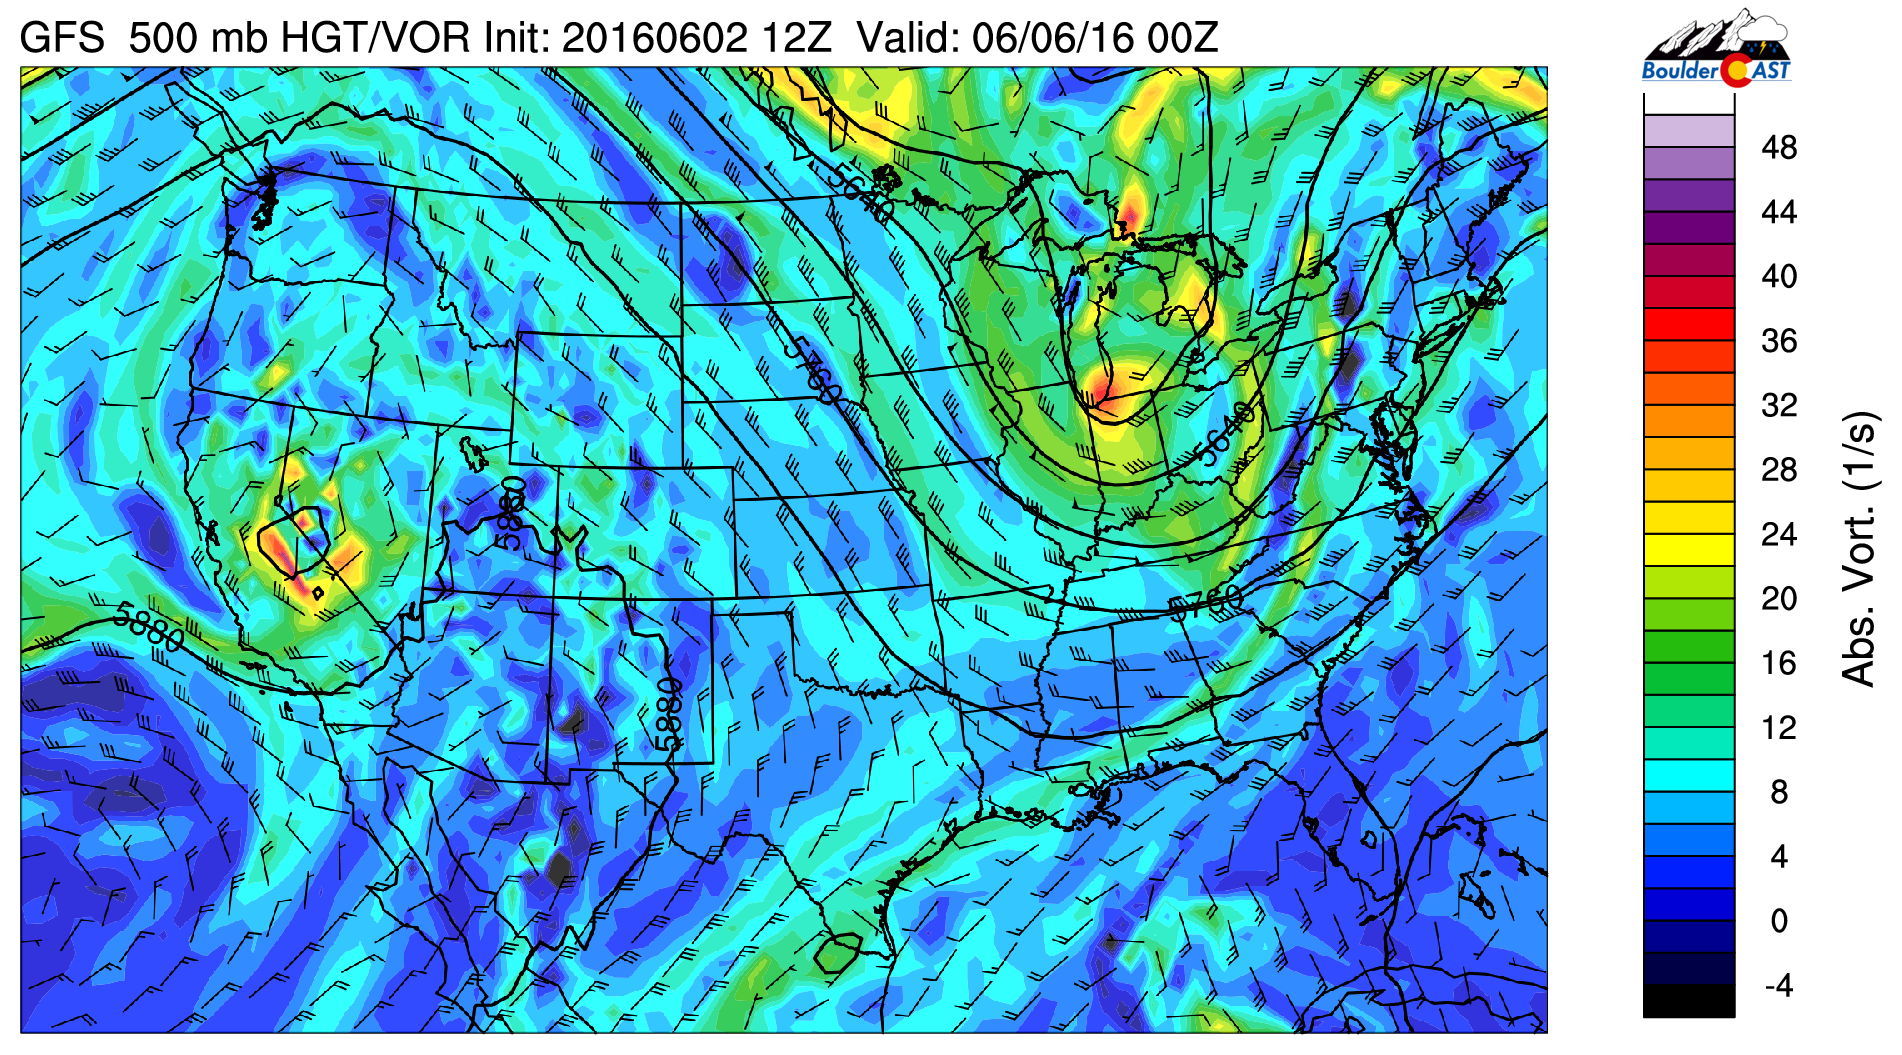 GFS 500 mb vorticity for Sunday night